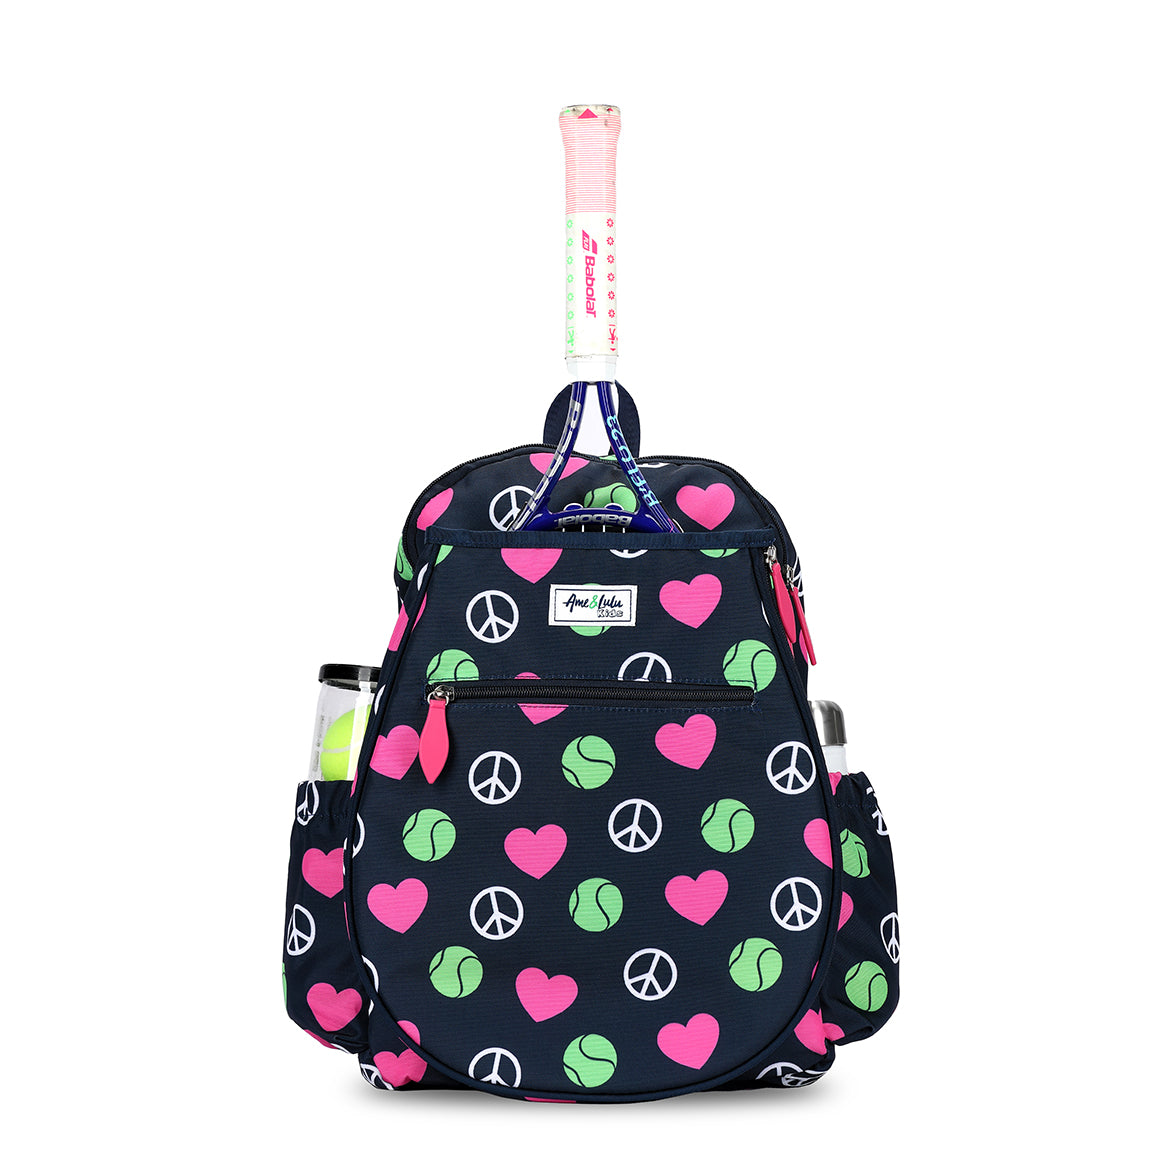 Front view of navy kids tennis backpack with repeating pattern of white peace signs, pink hearts and green tennis balls.